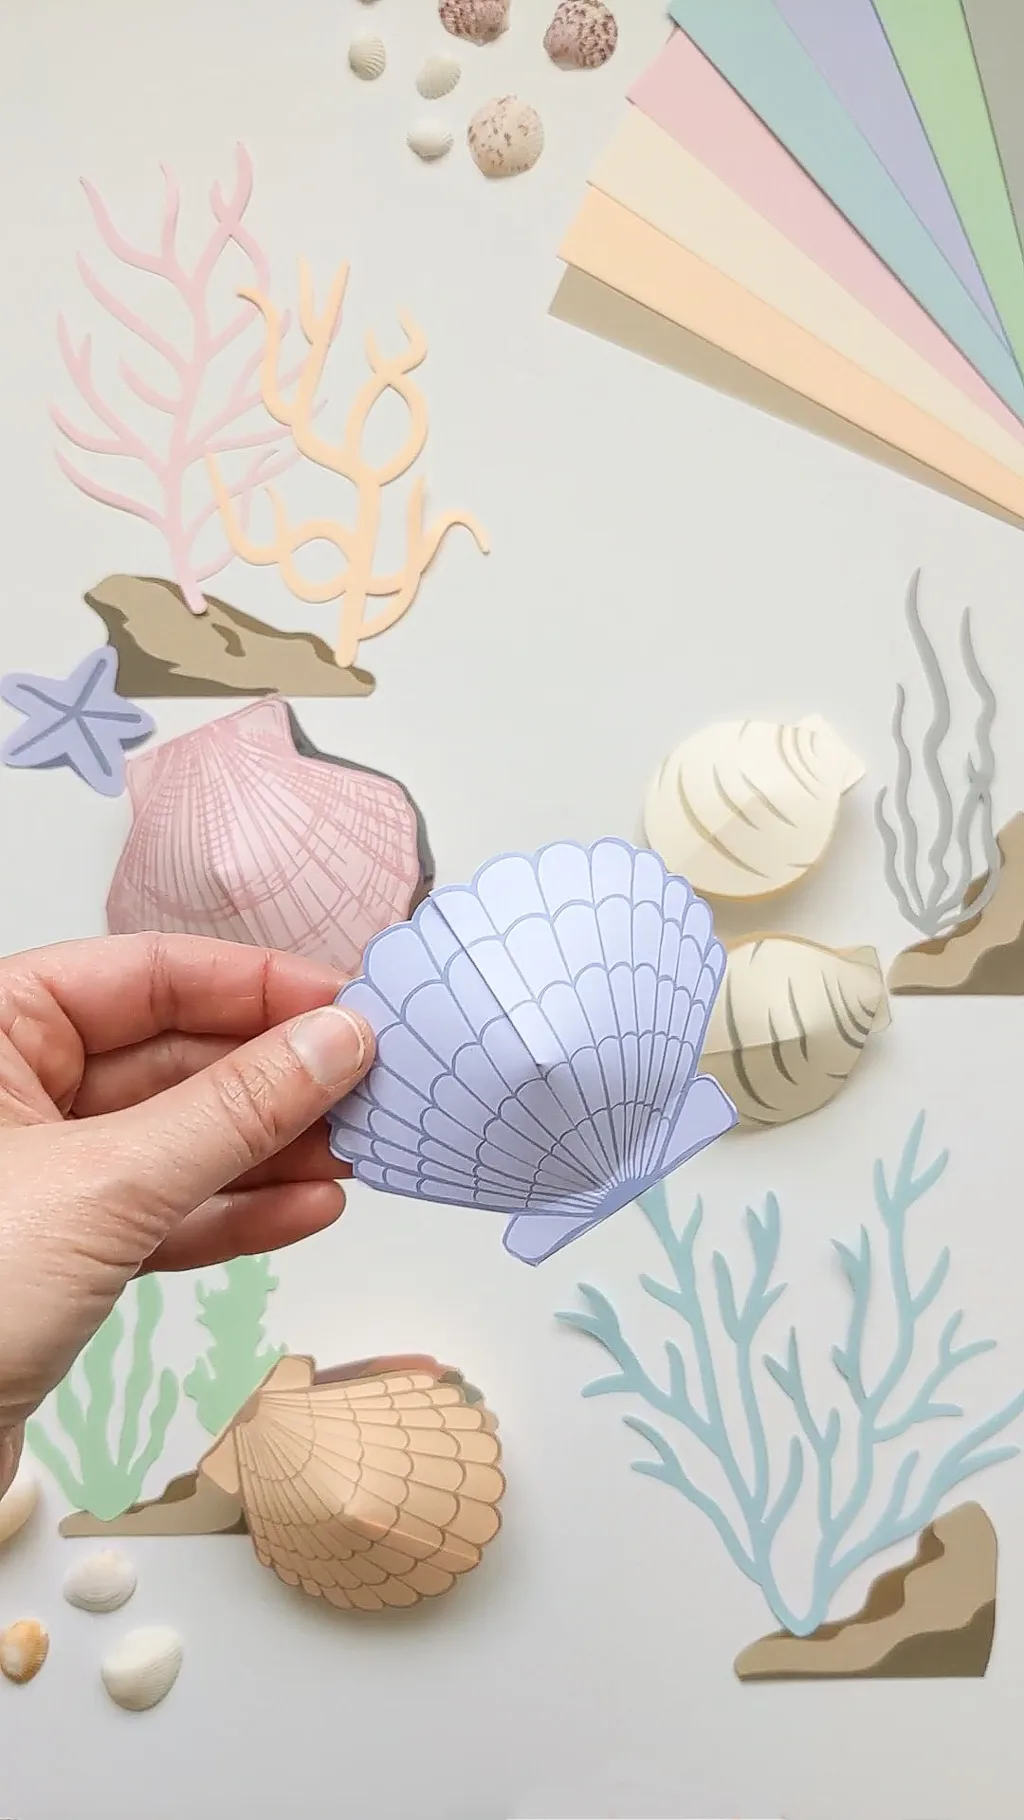 These fun crafts with seashells are perfect for summer!